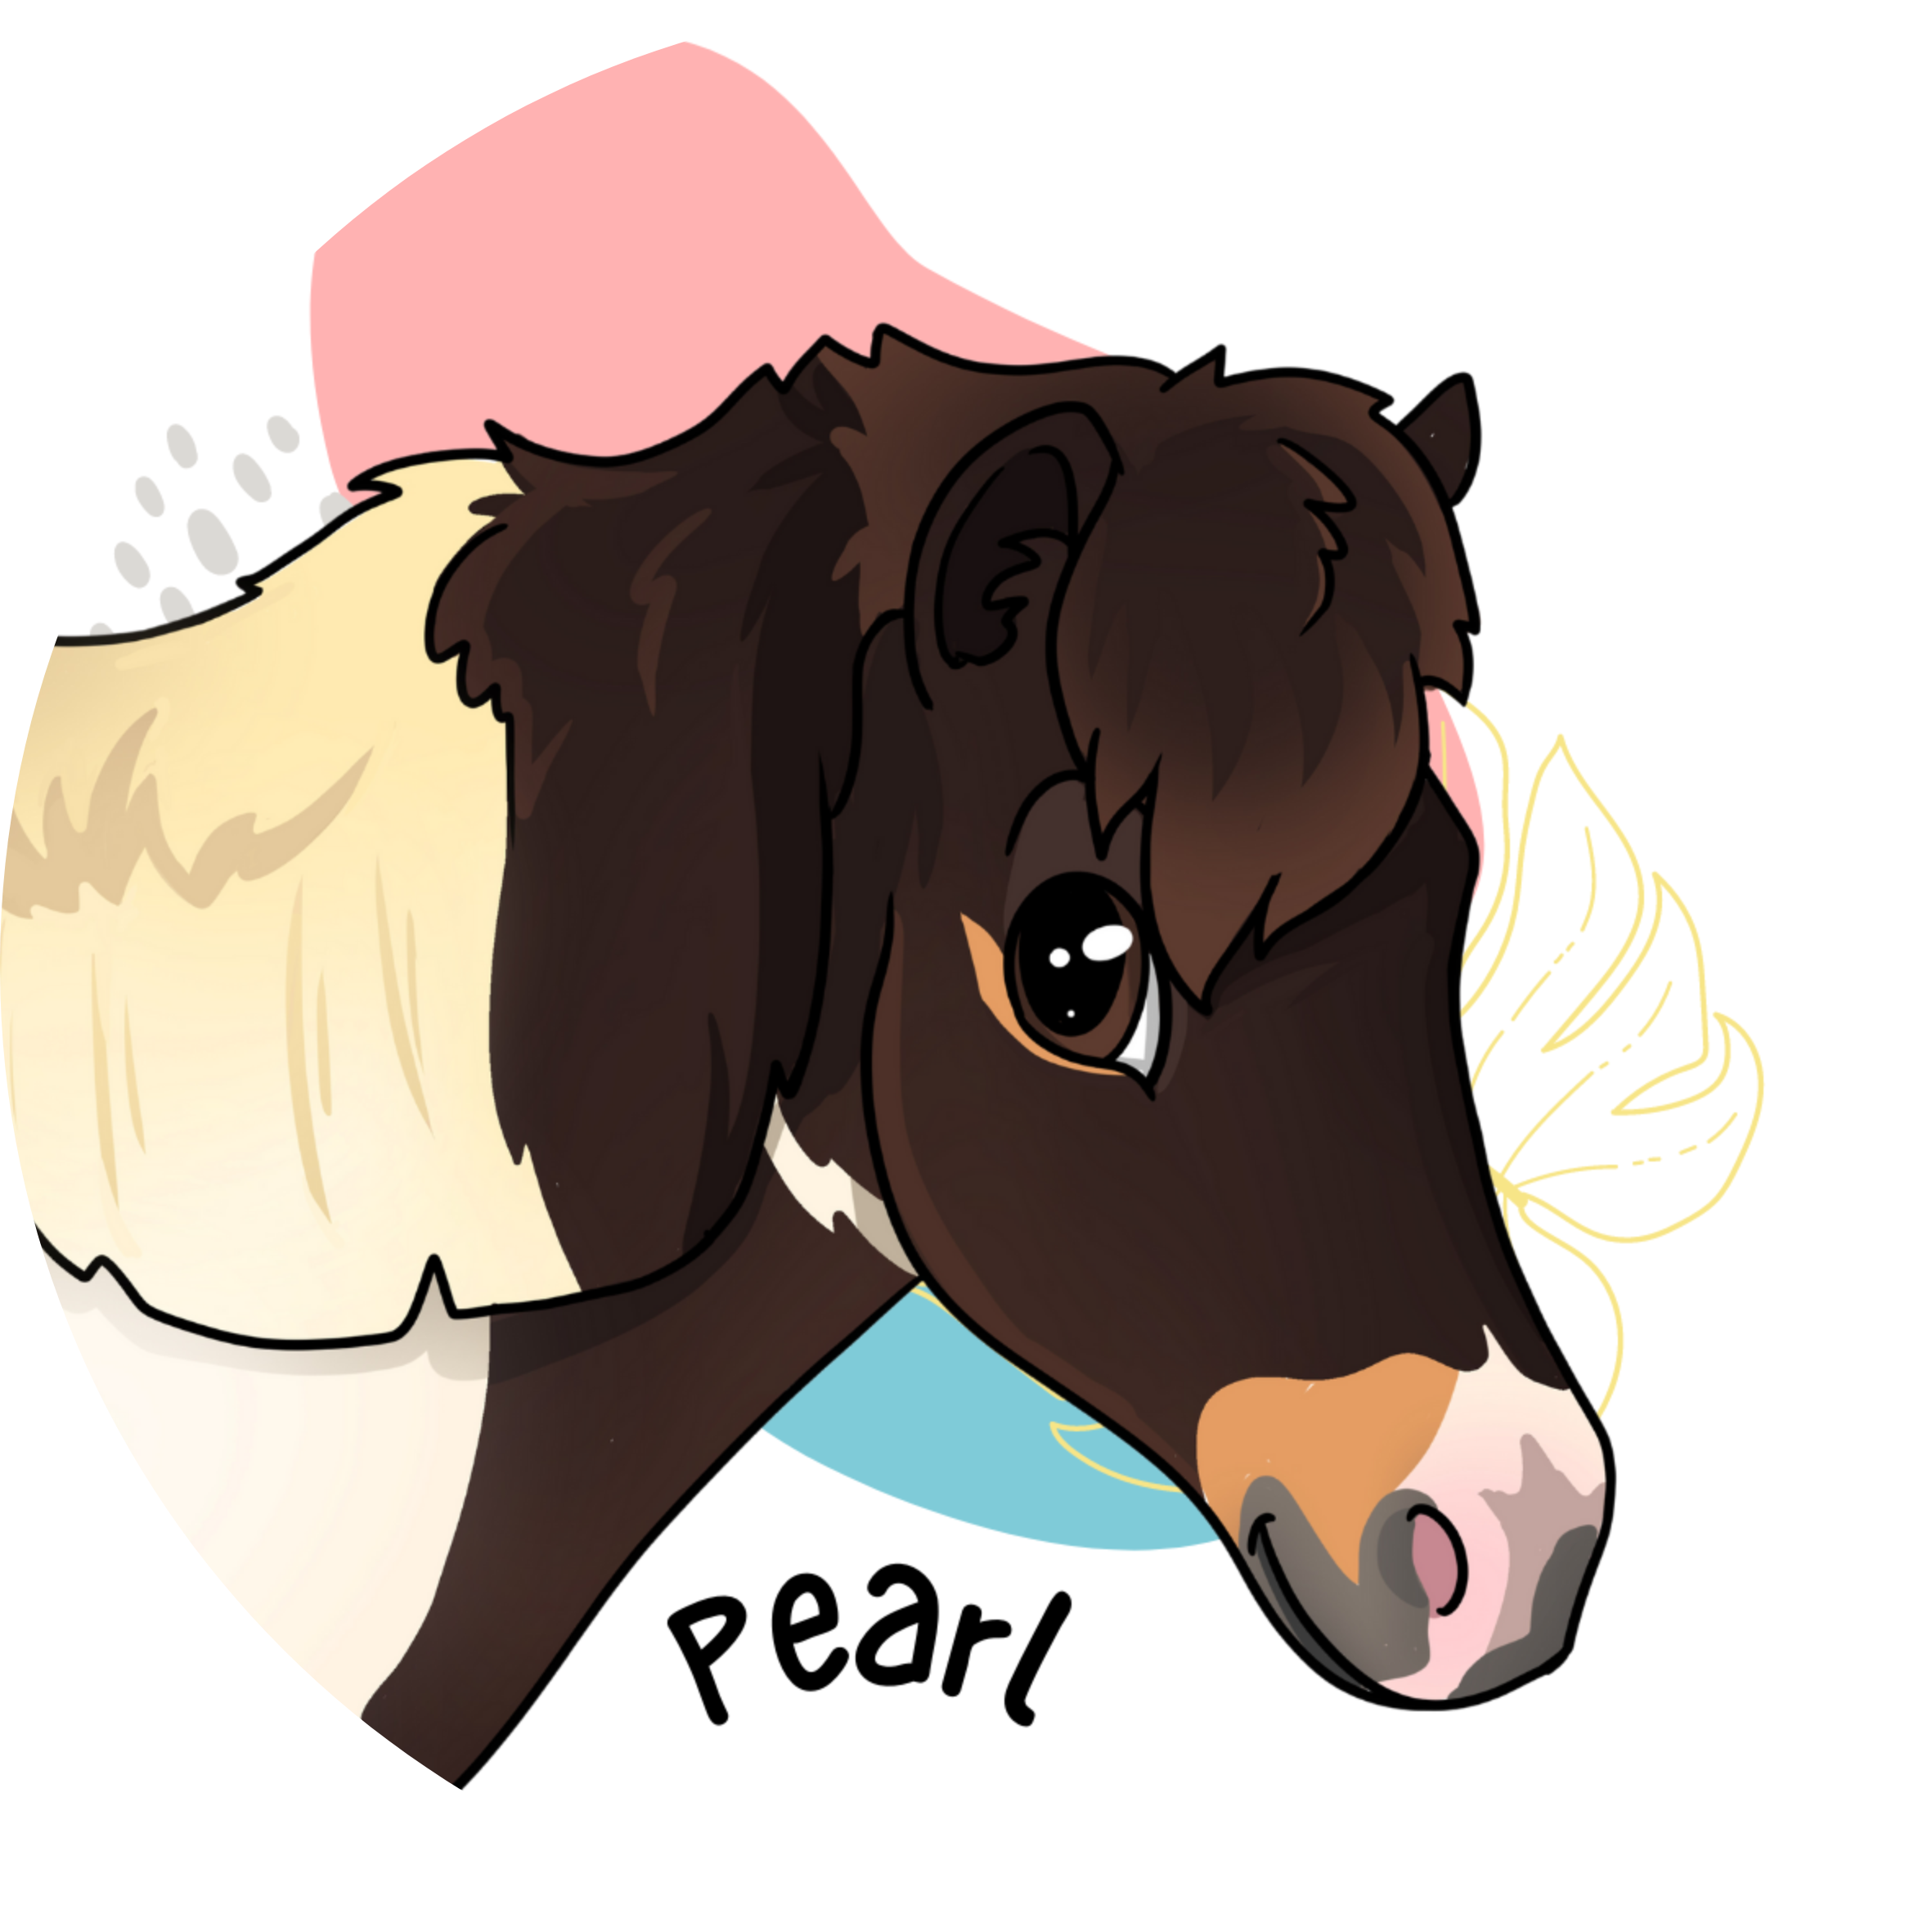 Pearl - Horse sticker .png large.png